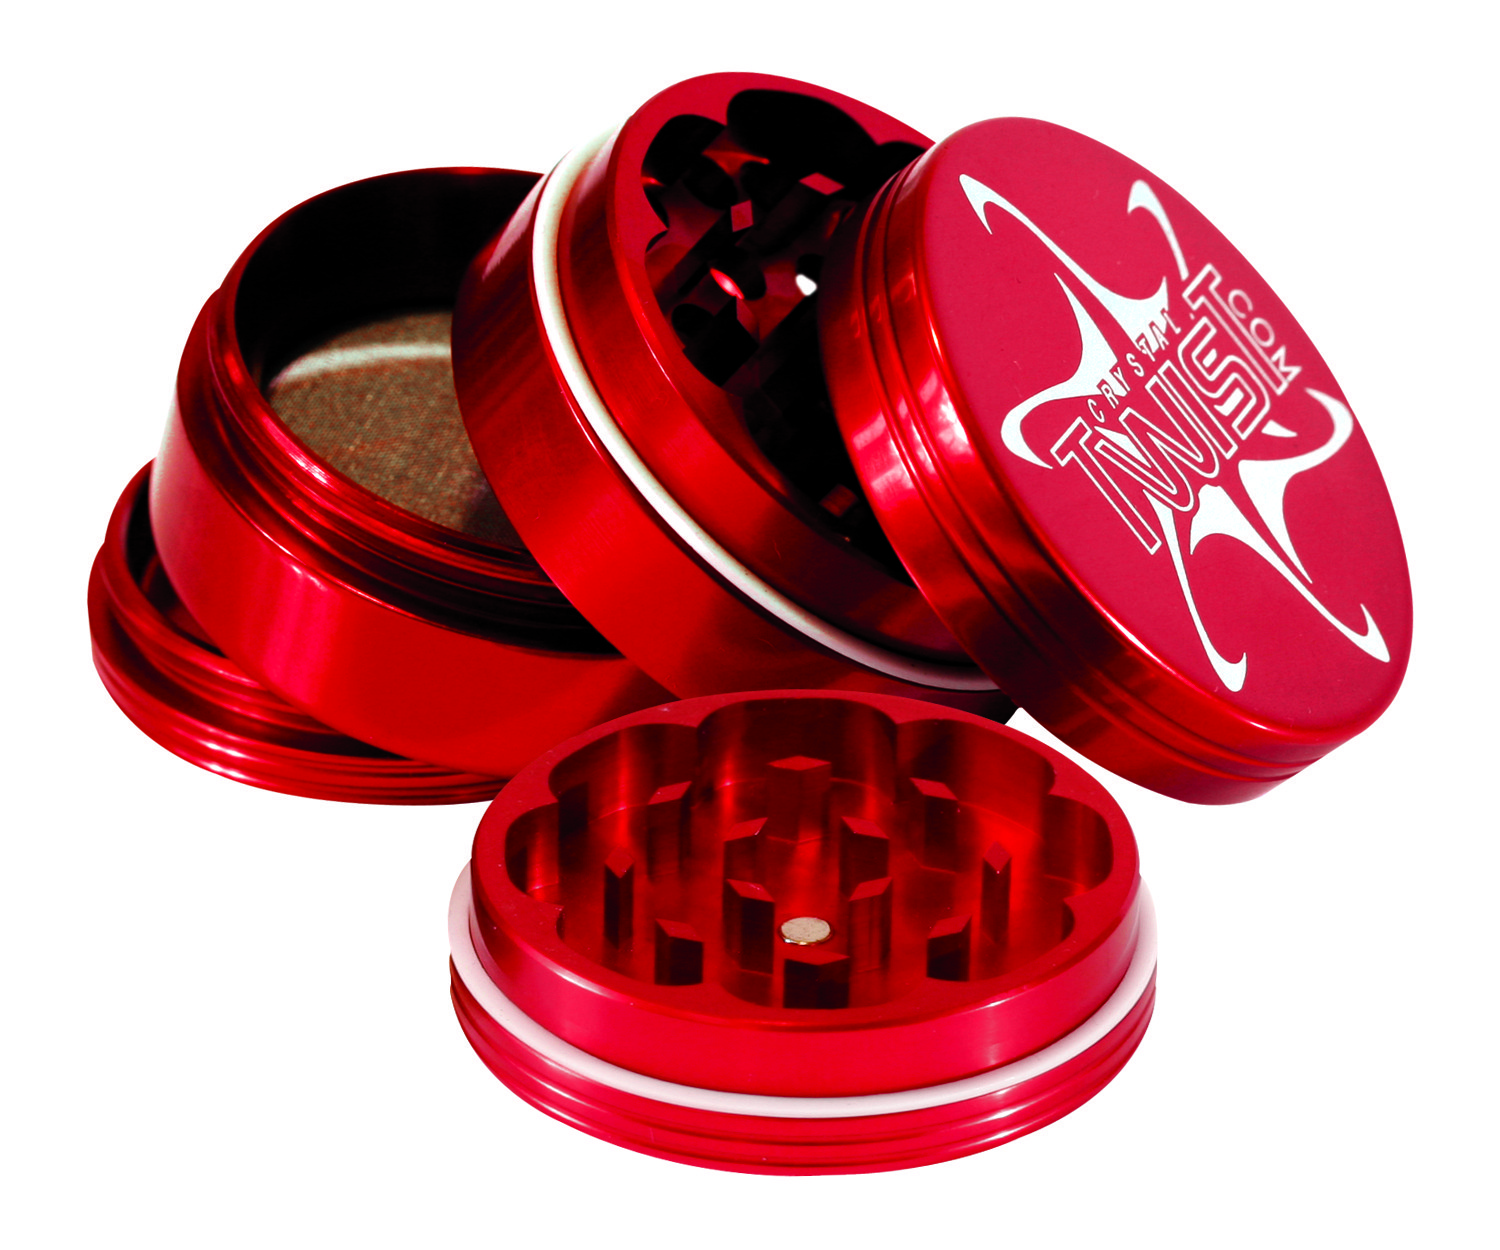 Red Eye Crystal Twist Small 40mm 5 Part Combo Aluminium Metal Herb Spice Grinder